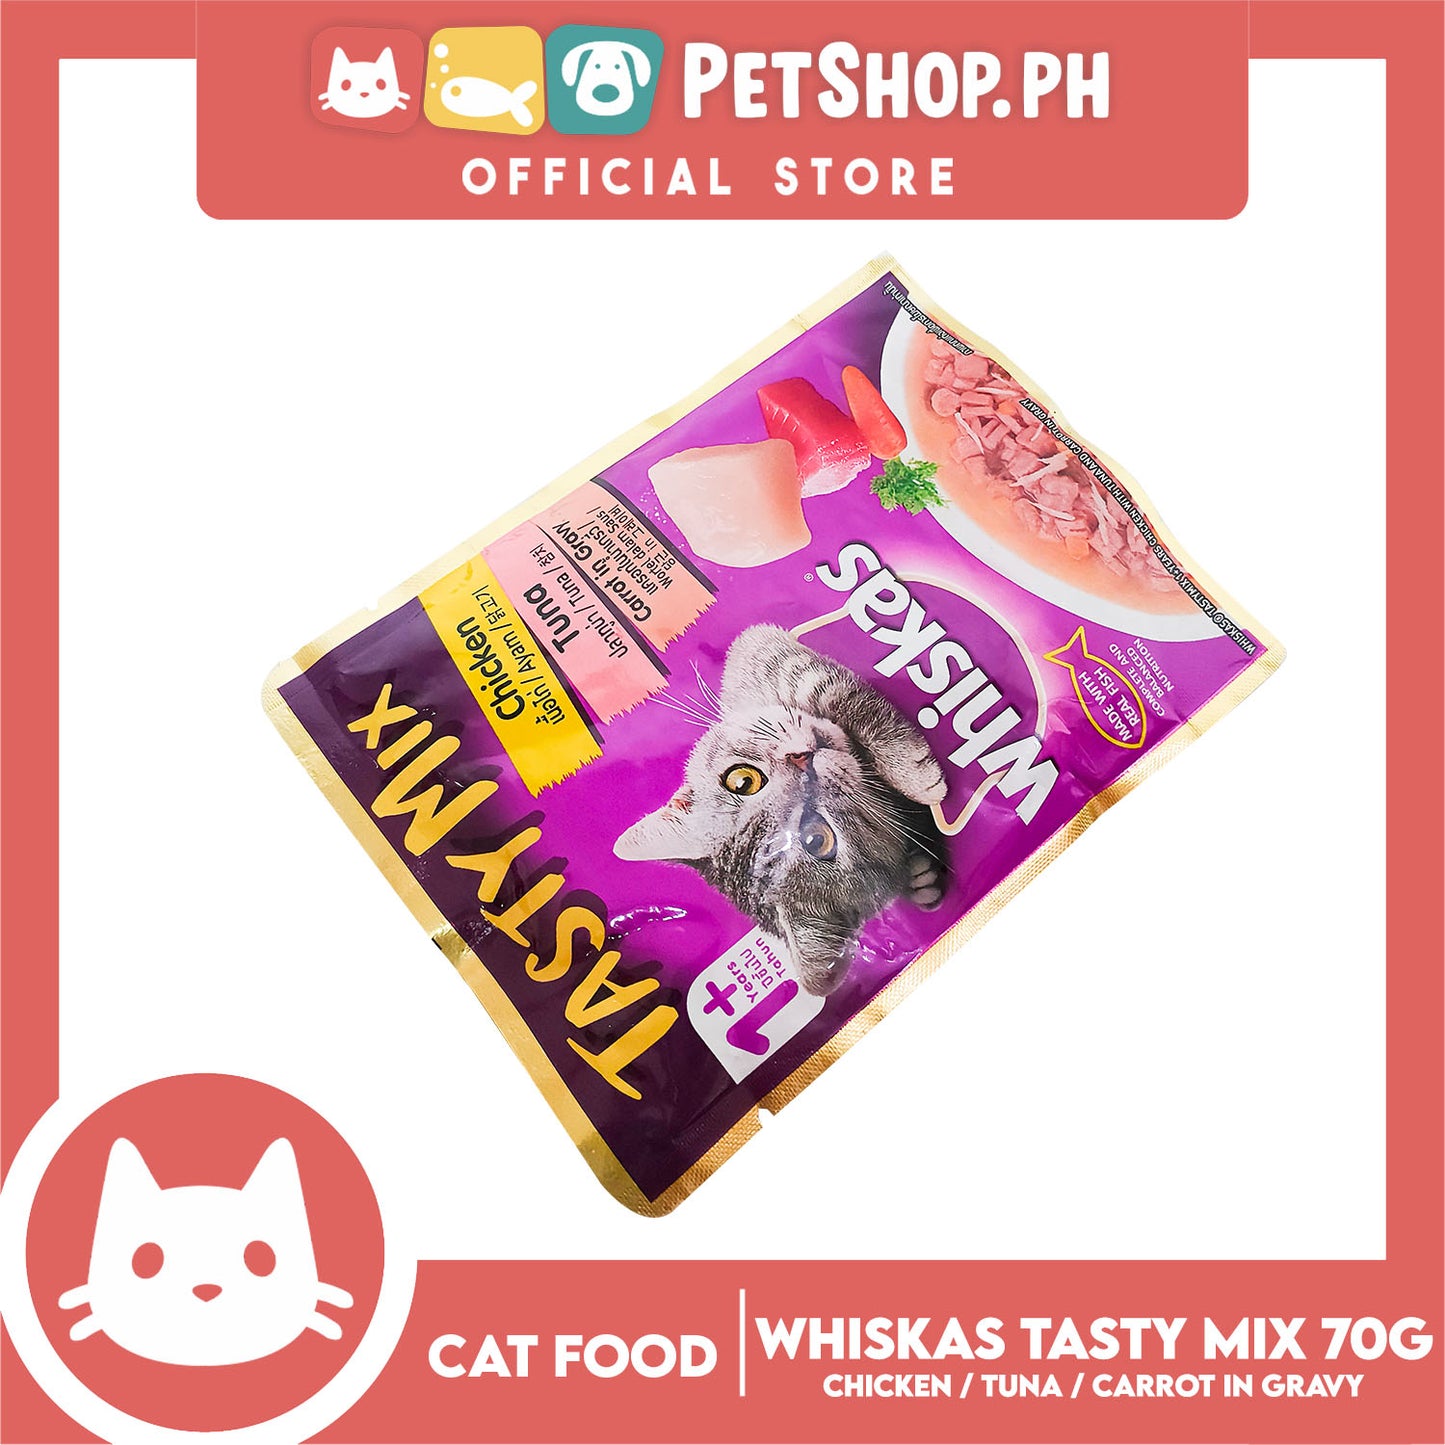 Whiskas Tasty Mix For Adult 1+ Year Cat Food 70g (Chicken Tuna Carrot In Gravy) Cat Wet Food, Cat Pouch Food